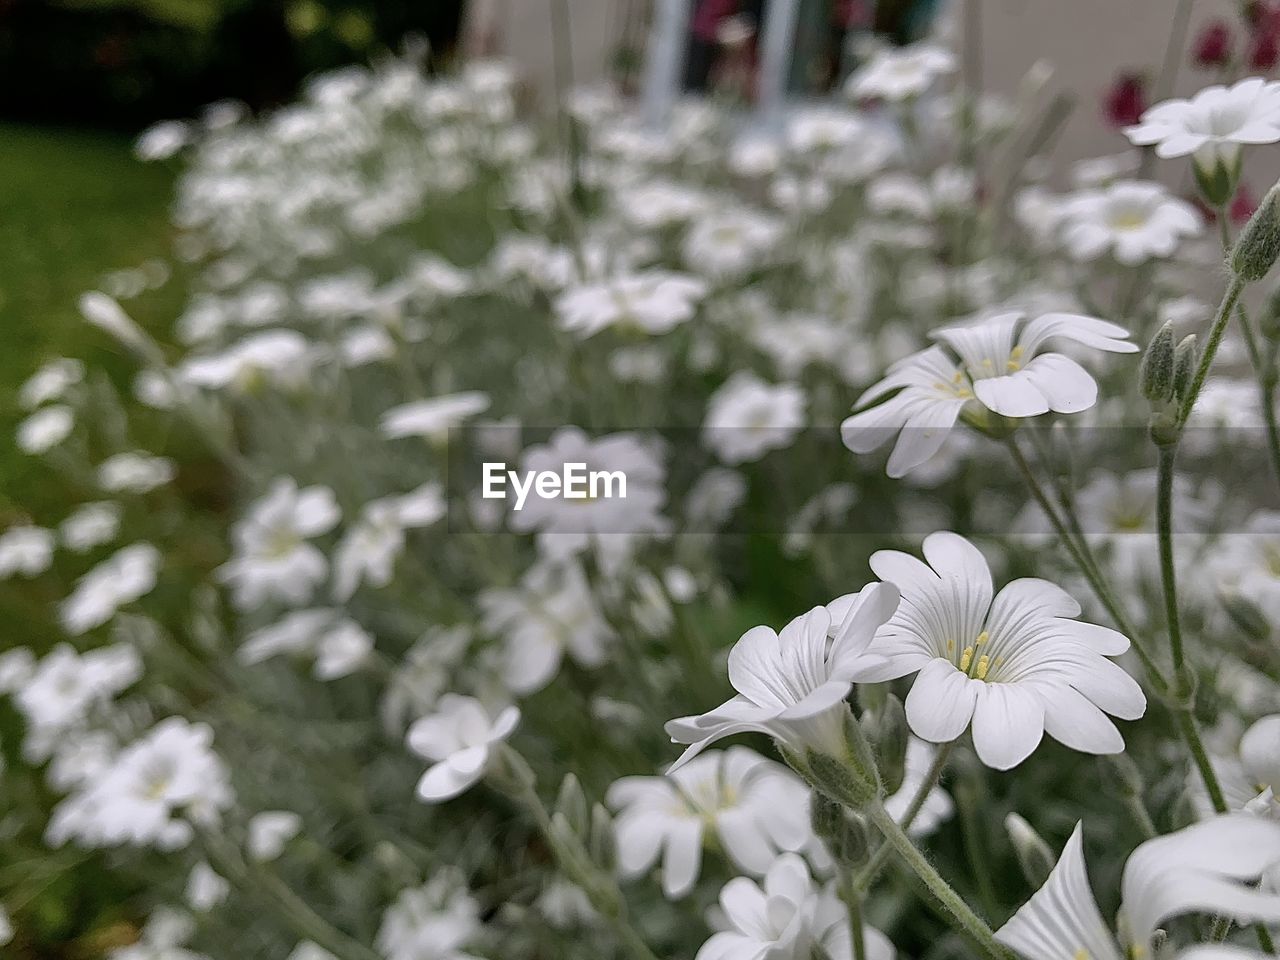 flower, flowering plant, plant, freshness, beauty in nature, white, fragility, nature, petal, close-up, growth, blossom, flower head, focus on foreground, no people, inflorescence, day, springtime, outdoors, selective focus, botany, daisy